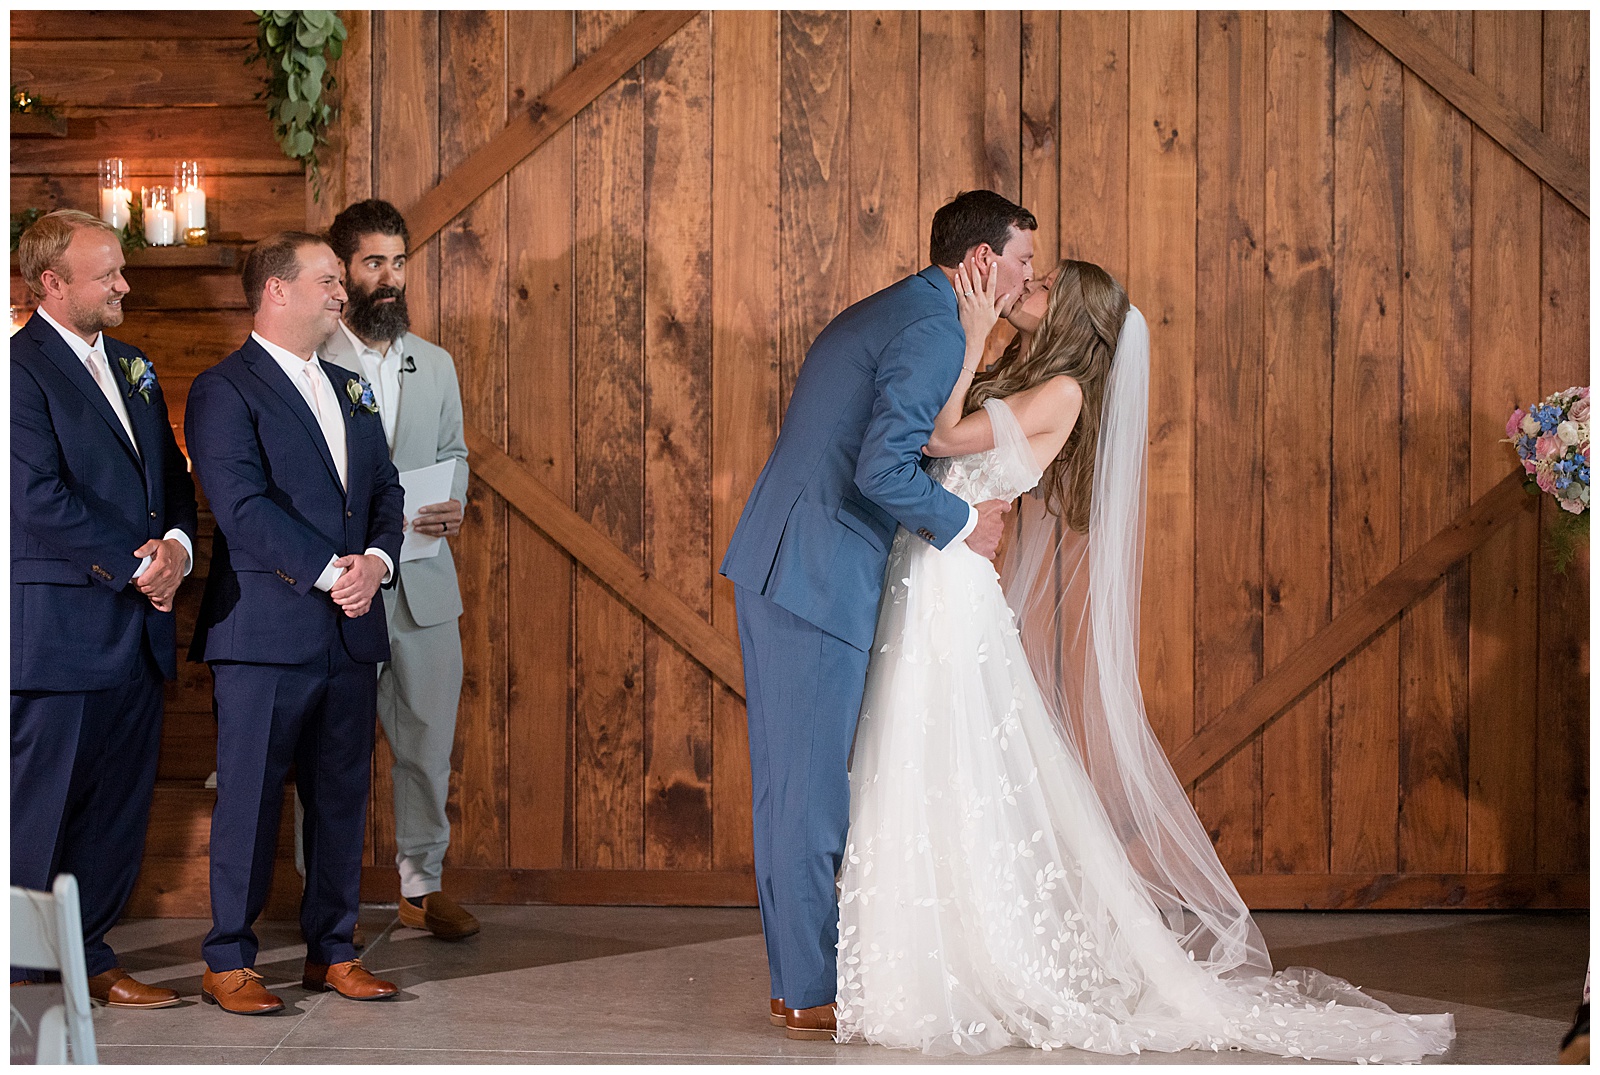 couple sharing their first kiss inside barn wedding venue in lancaster county 